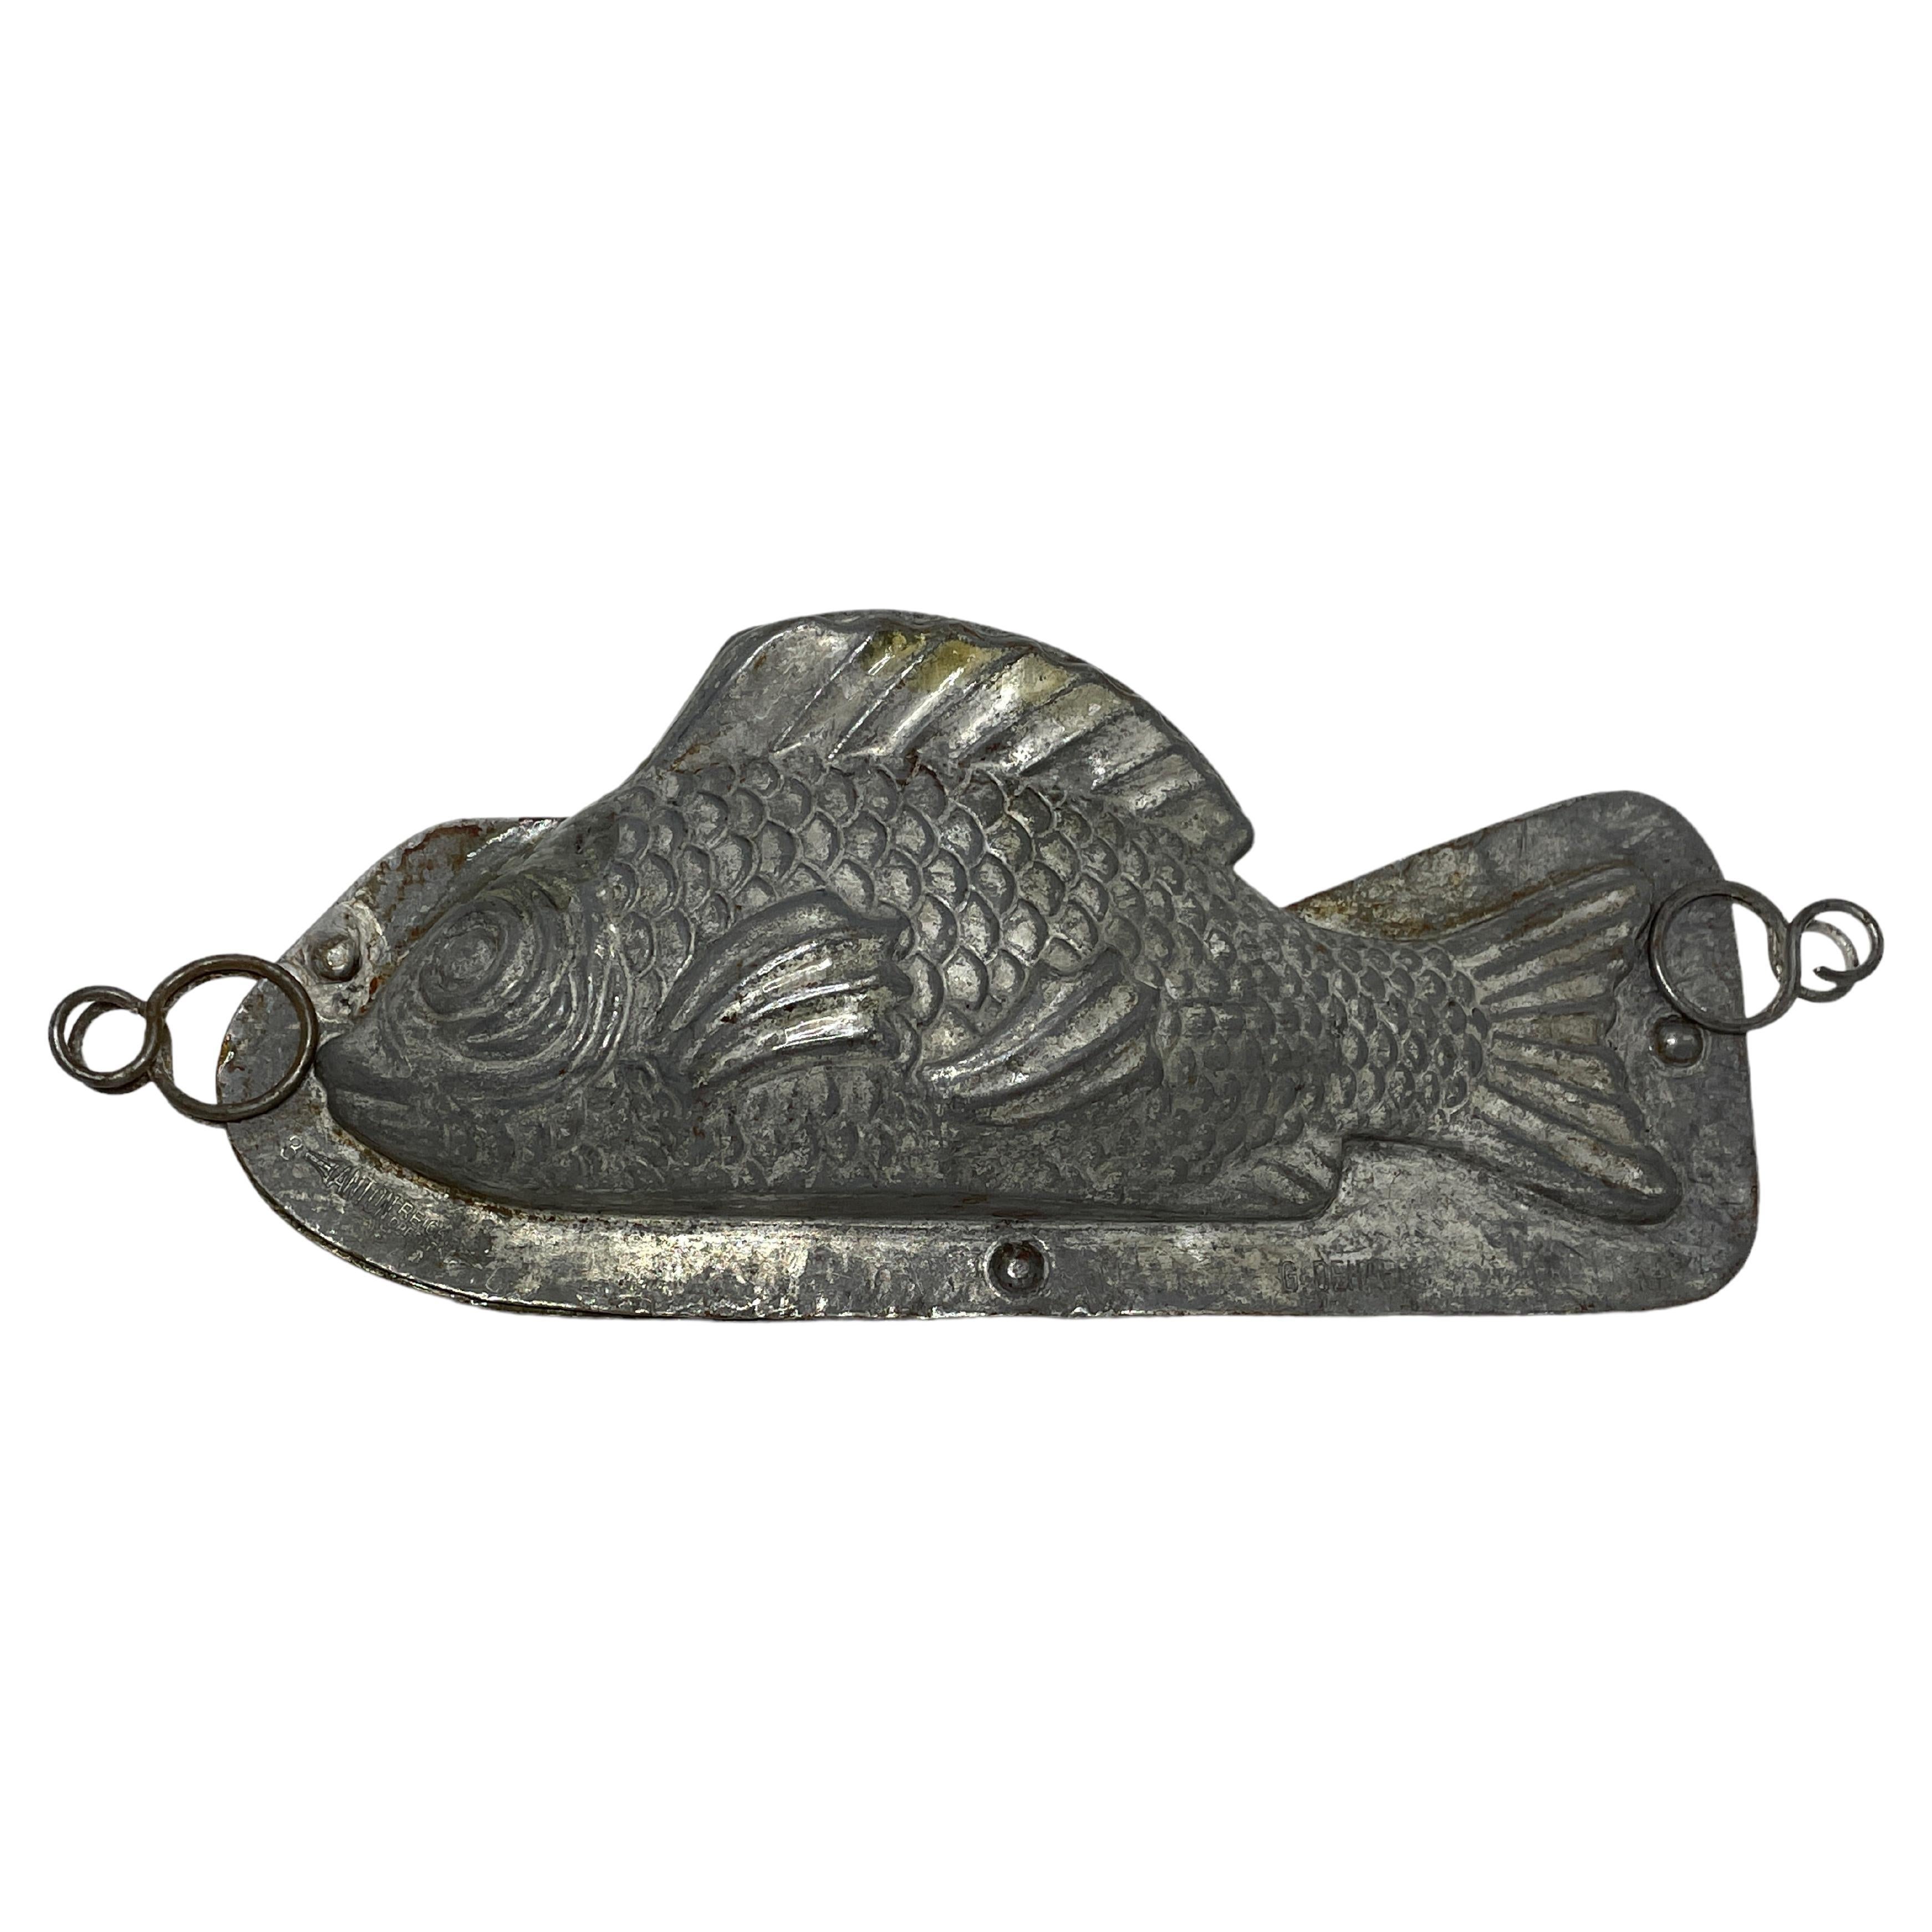 Fish Dolphin Chocolate Mold Antique 1890s, Anton Reiche, Dresden, Germany